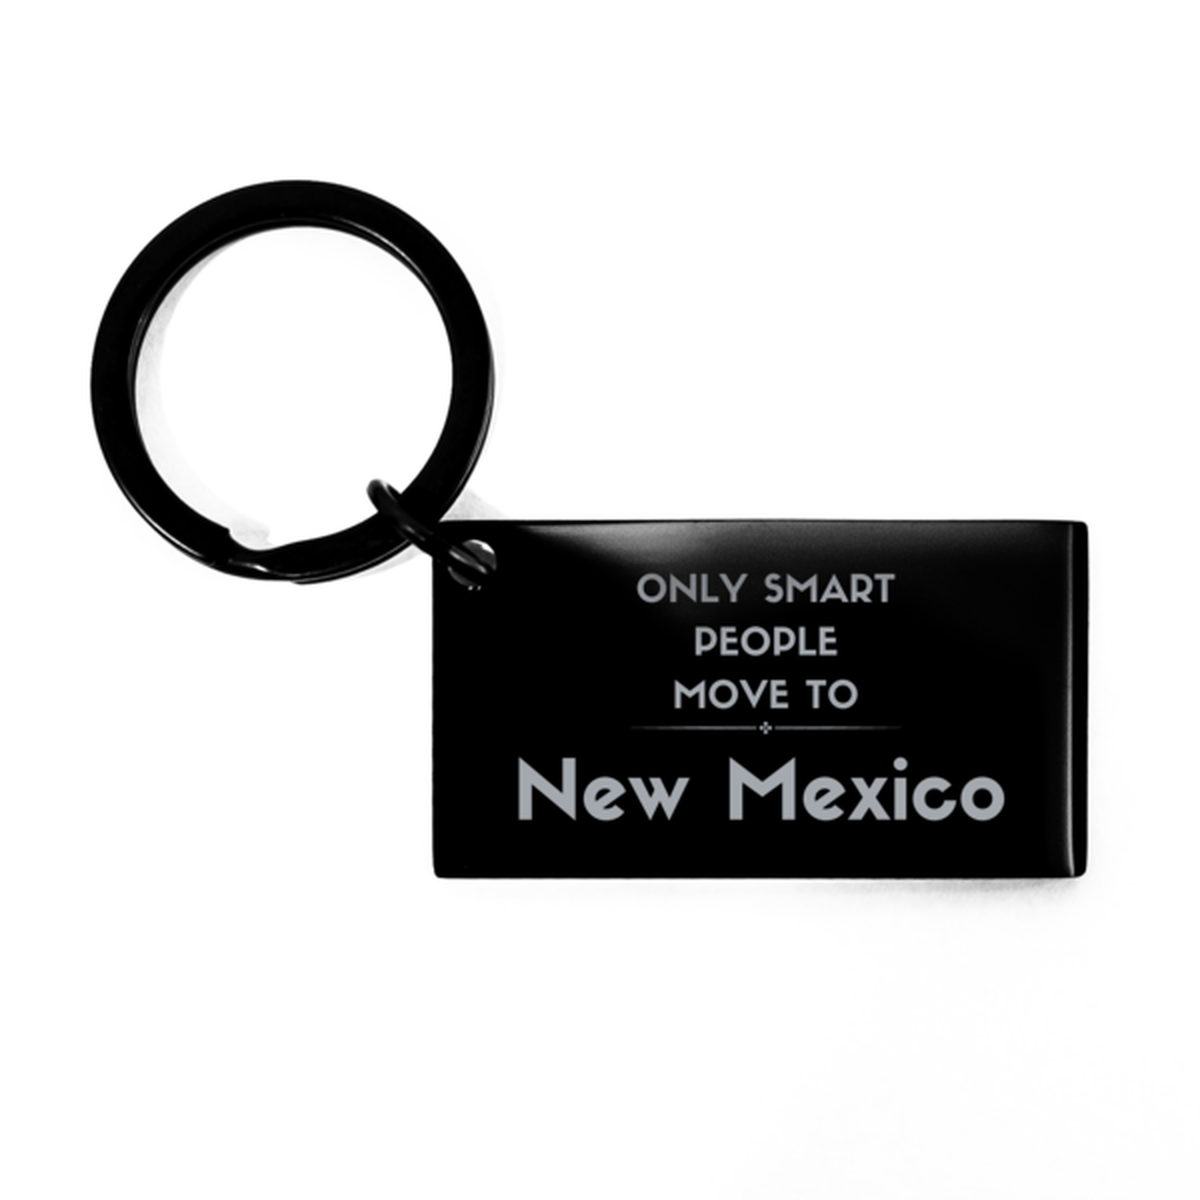 Only smart people move to New Mexico Keychain, Gag Gifts For New Mexico, Move to New Mexico Gifts for Friends Coworker Funny Saying Quote